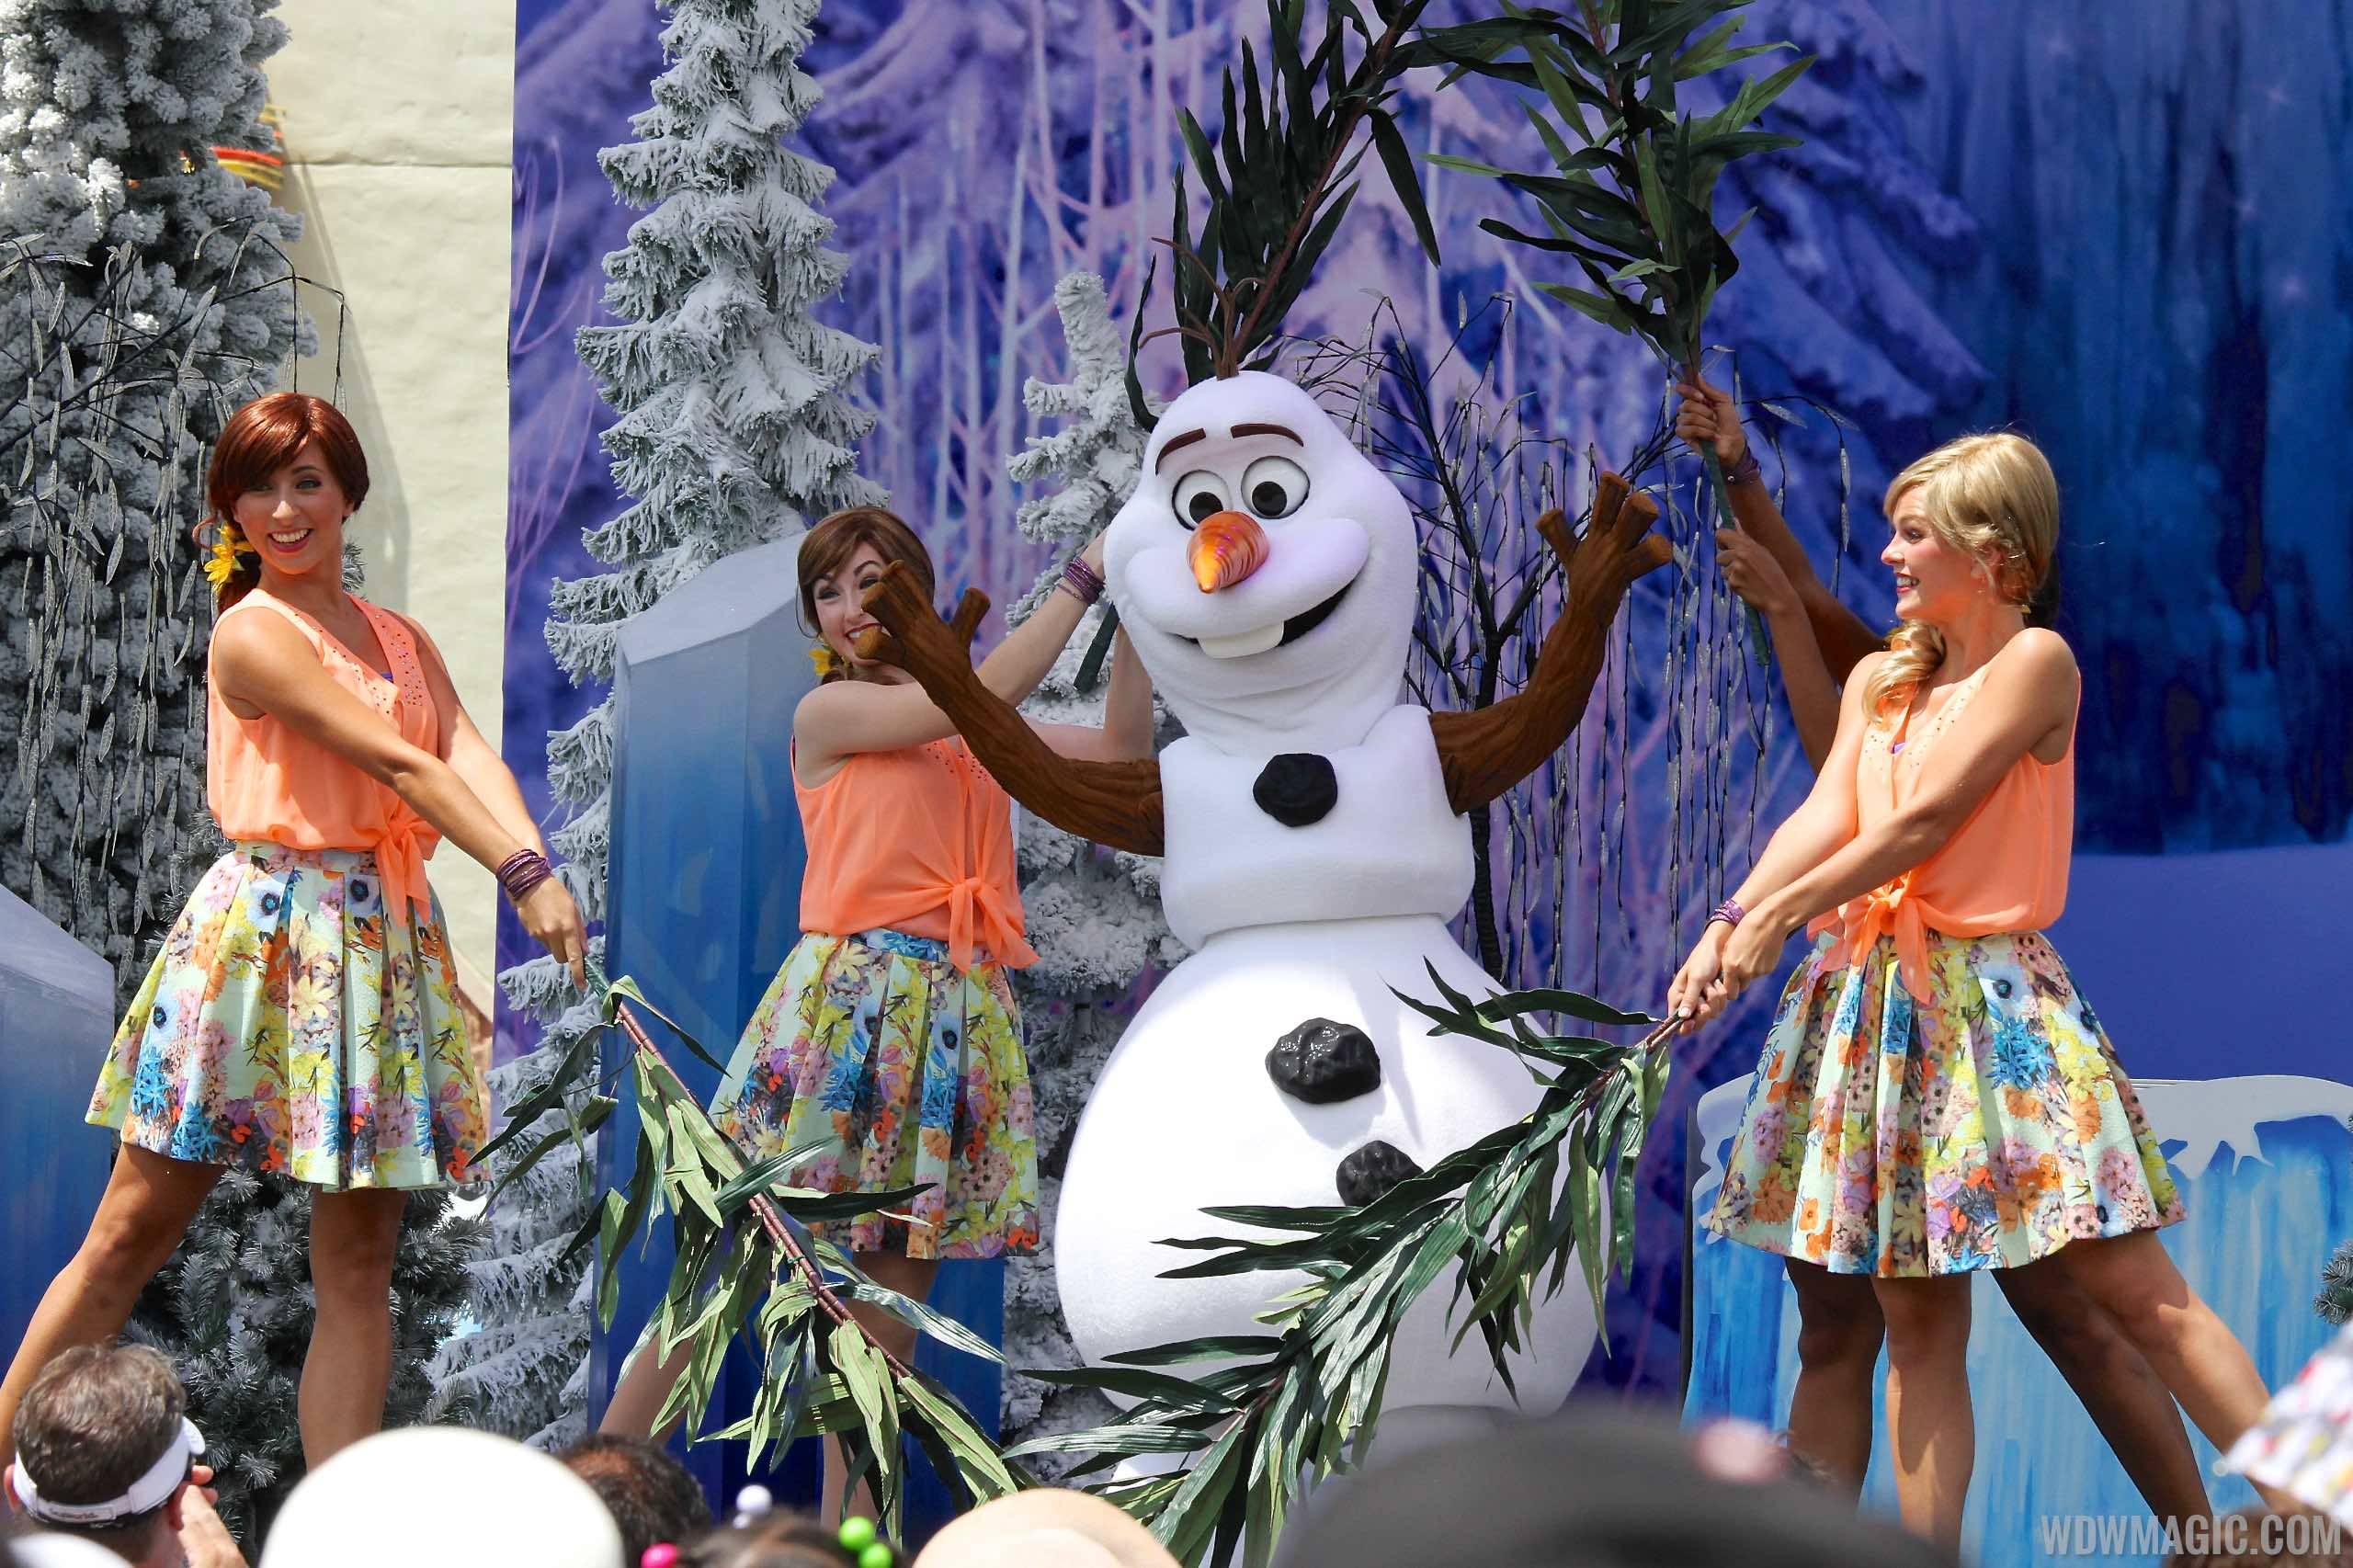 A 'Frozen' Sing-Along Celebration will move to the former home of American Idol - the newly named Hyperion Theater